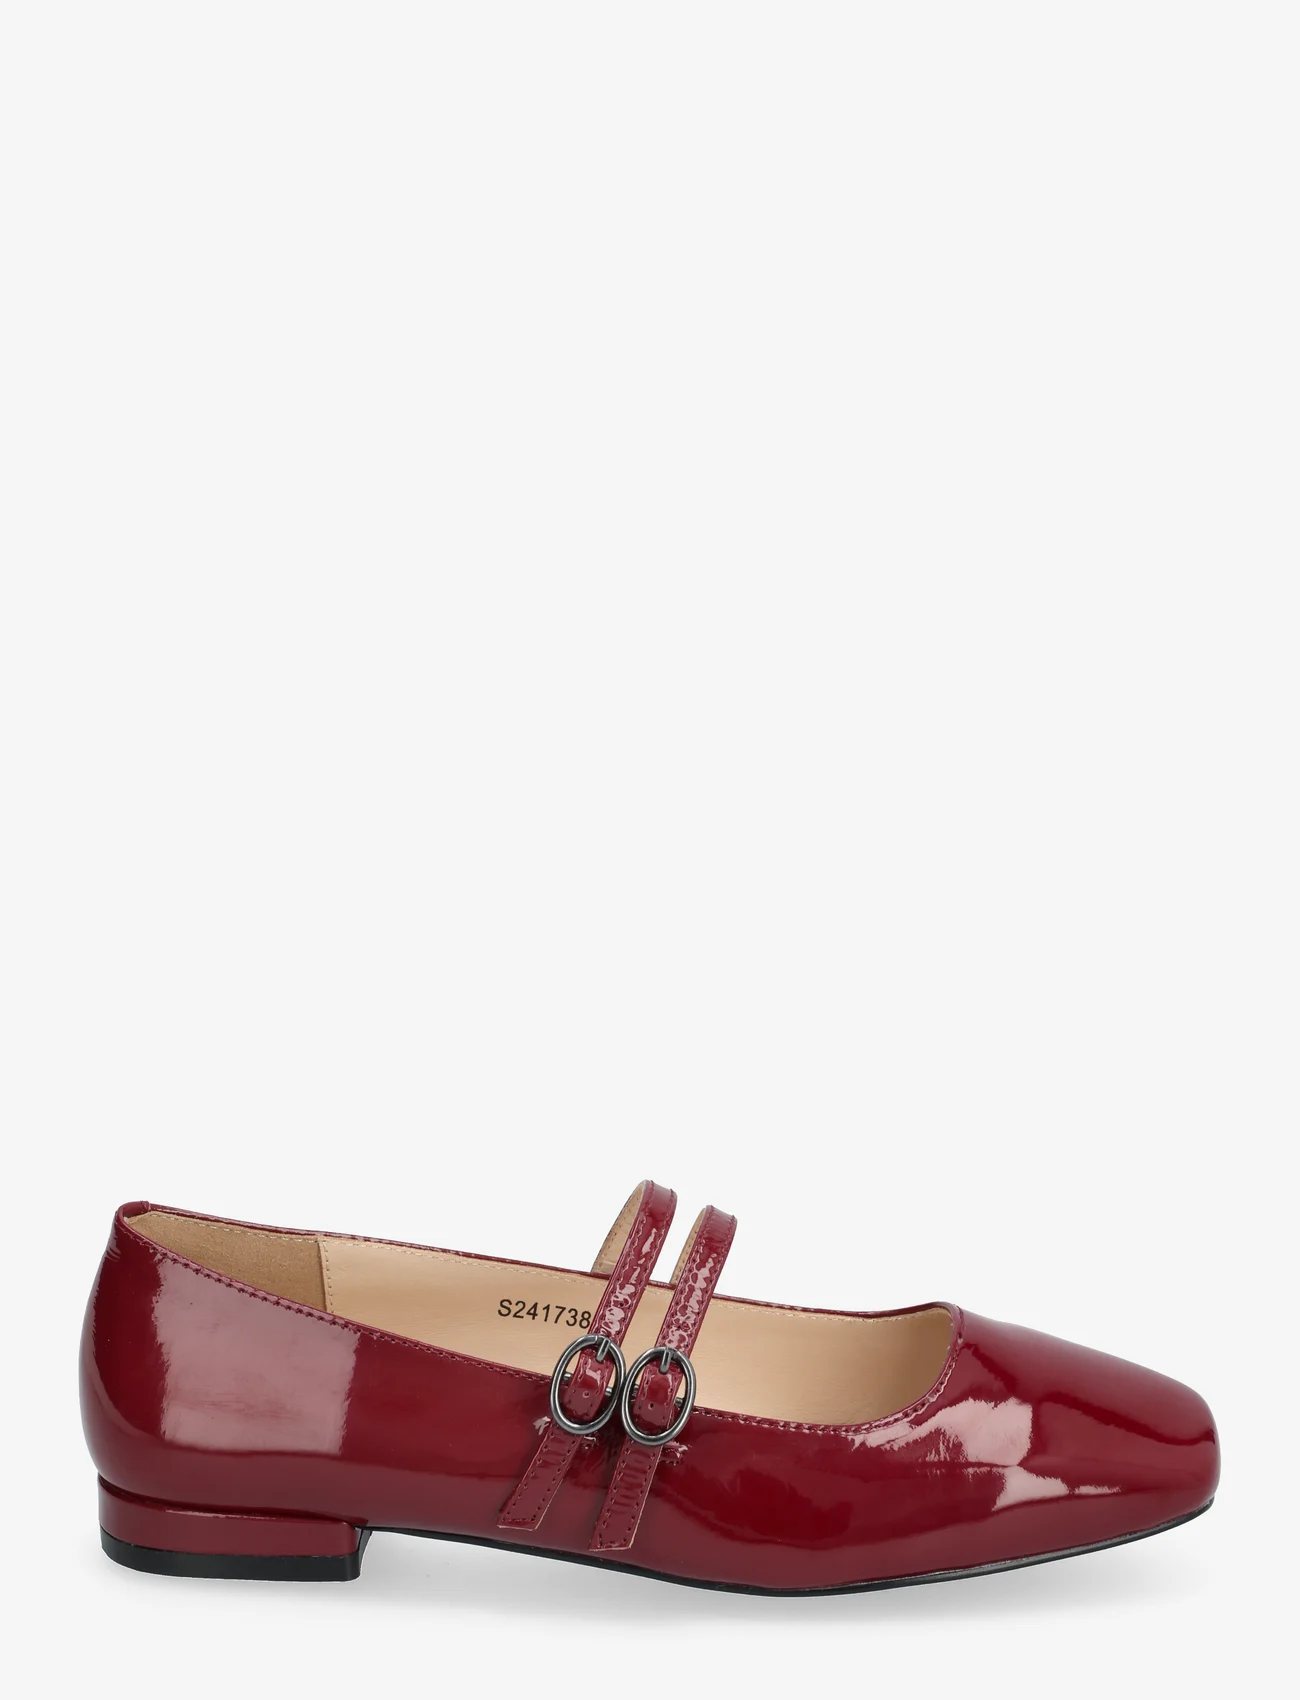 Sofie Schnoor - Shoe - mary jane shoes - red - 1